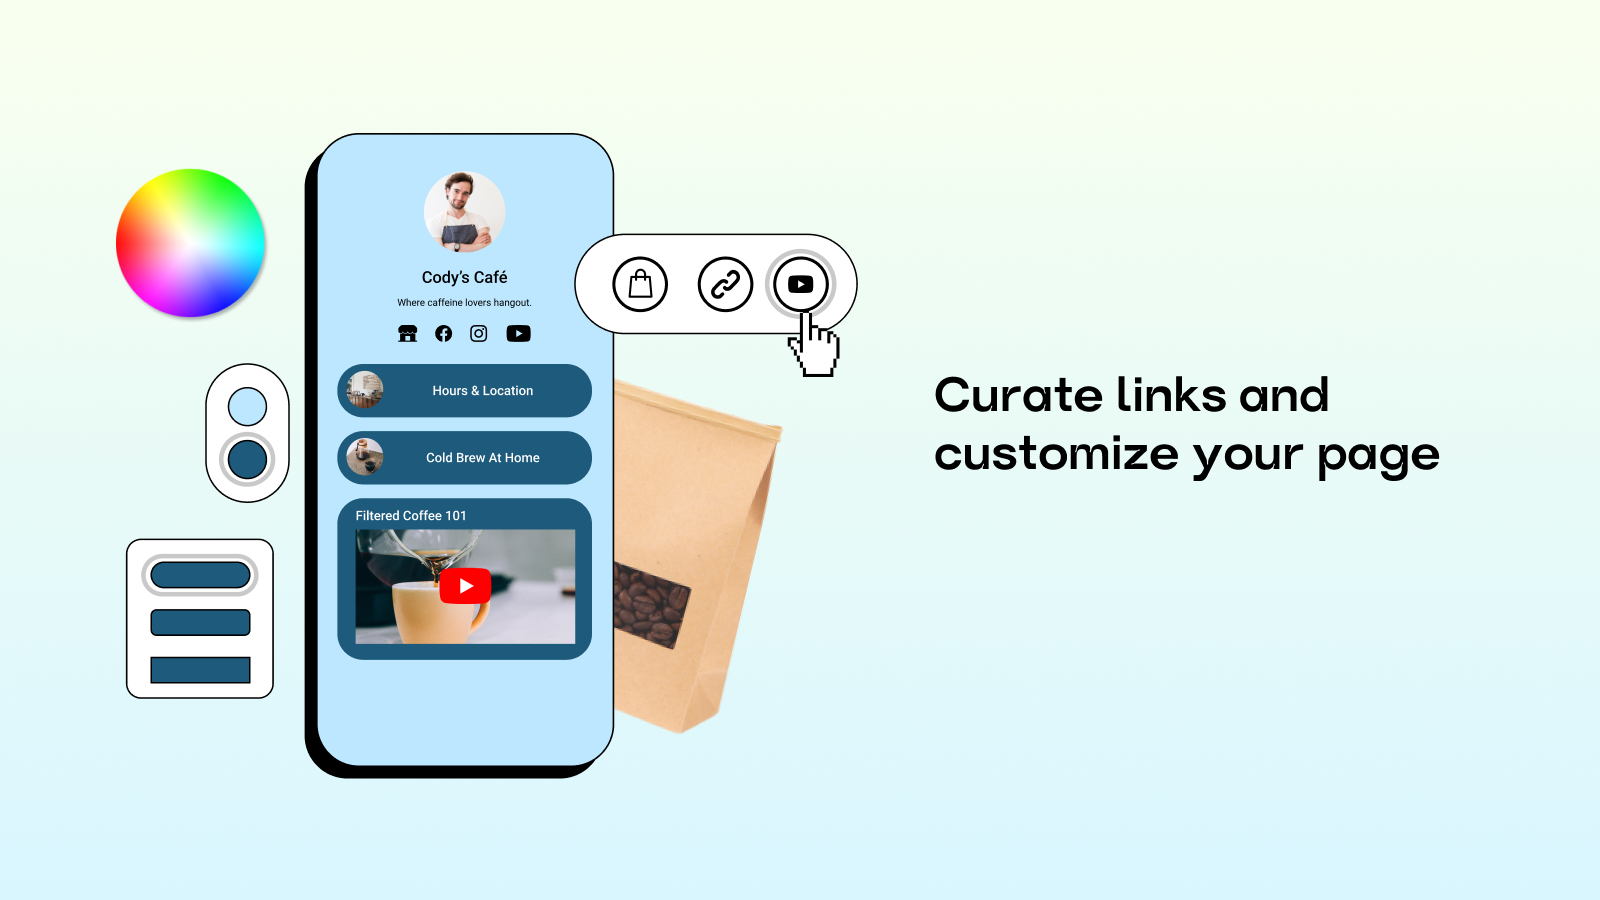 Curate links and customize your page